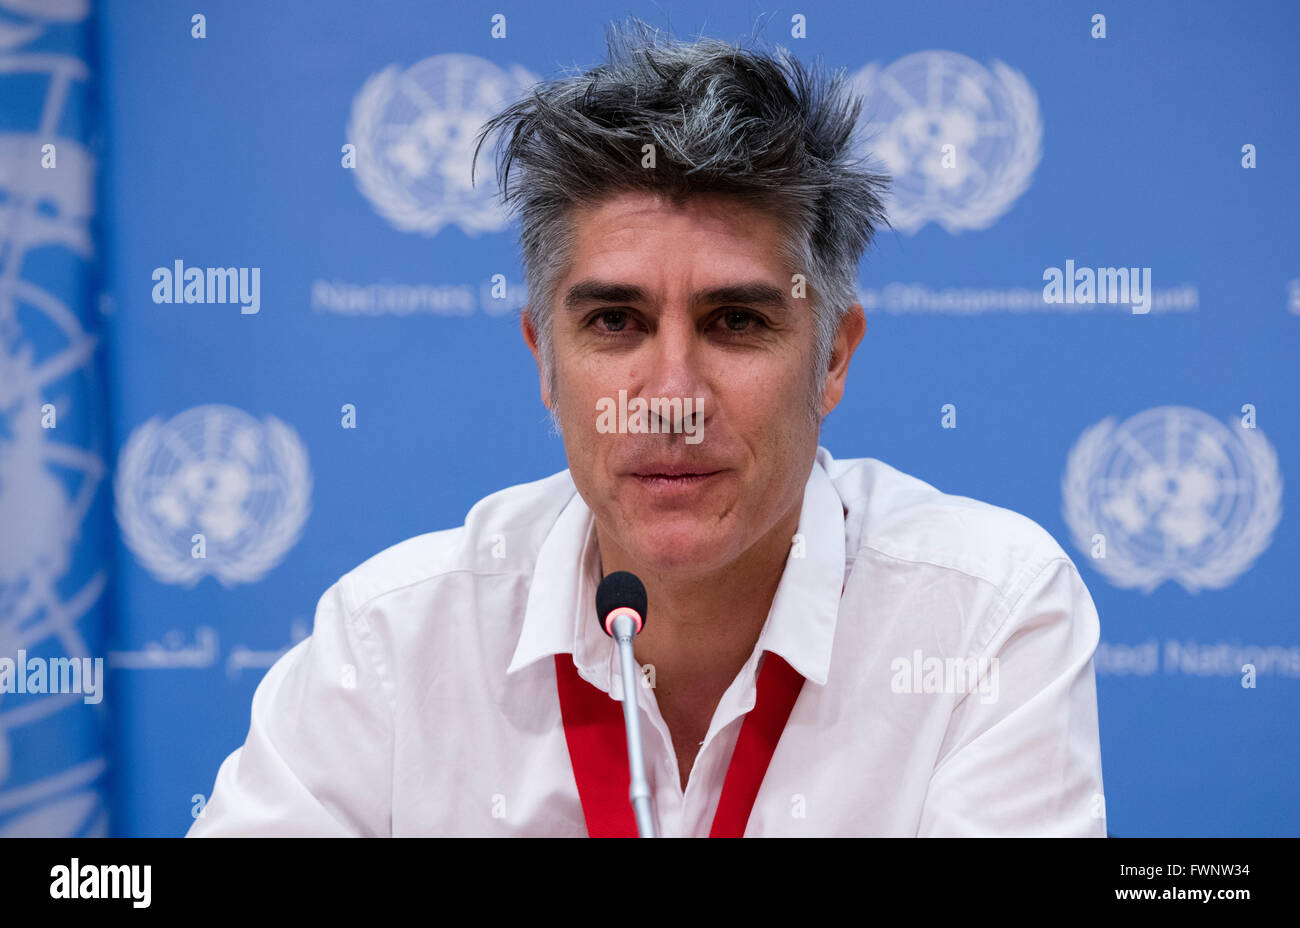 New York, United States. 05th Apr, 2016. Alejandro Aravena, Chilean architect and winner of the Pritzker Architecture Prize for 2016, briefs journalists on the link between architecture and sustainable development today at the UN Headquarters in New York. © Luiz Rampelotto/Pacific Press/Alamy Live News Stock Photo